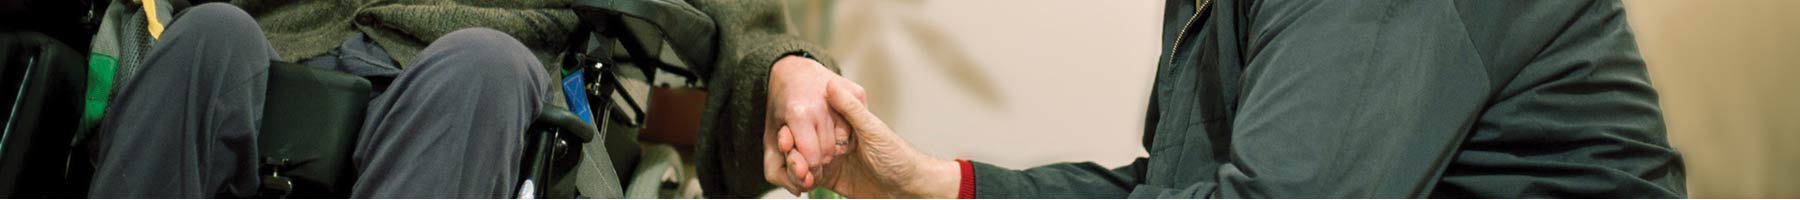 Man in a wheelchair holds the hand of a caregiver